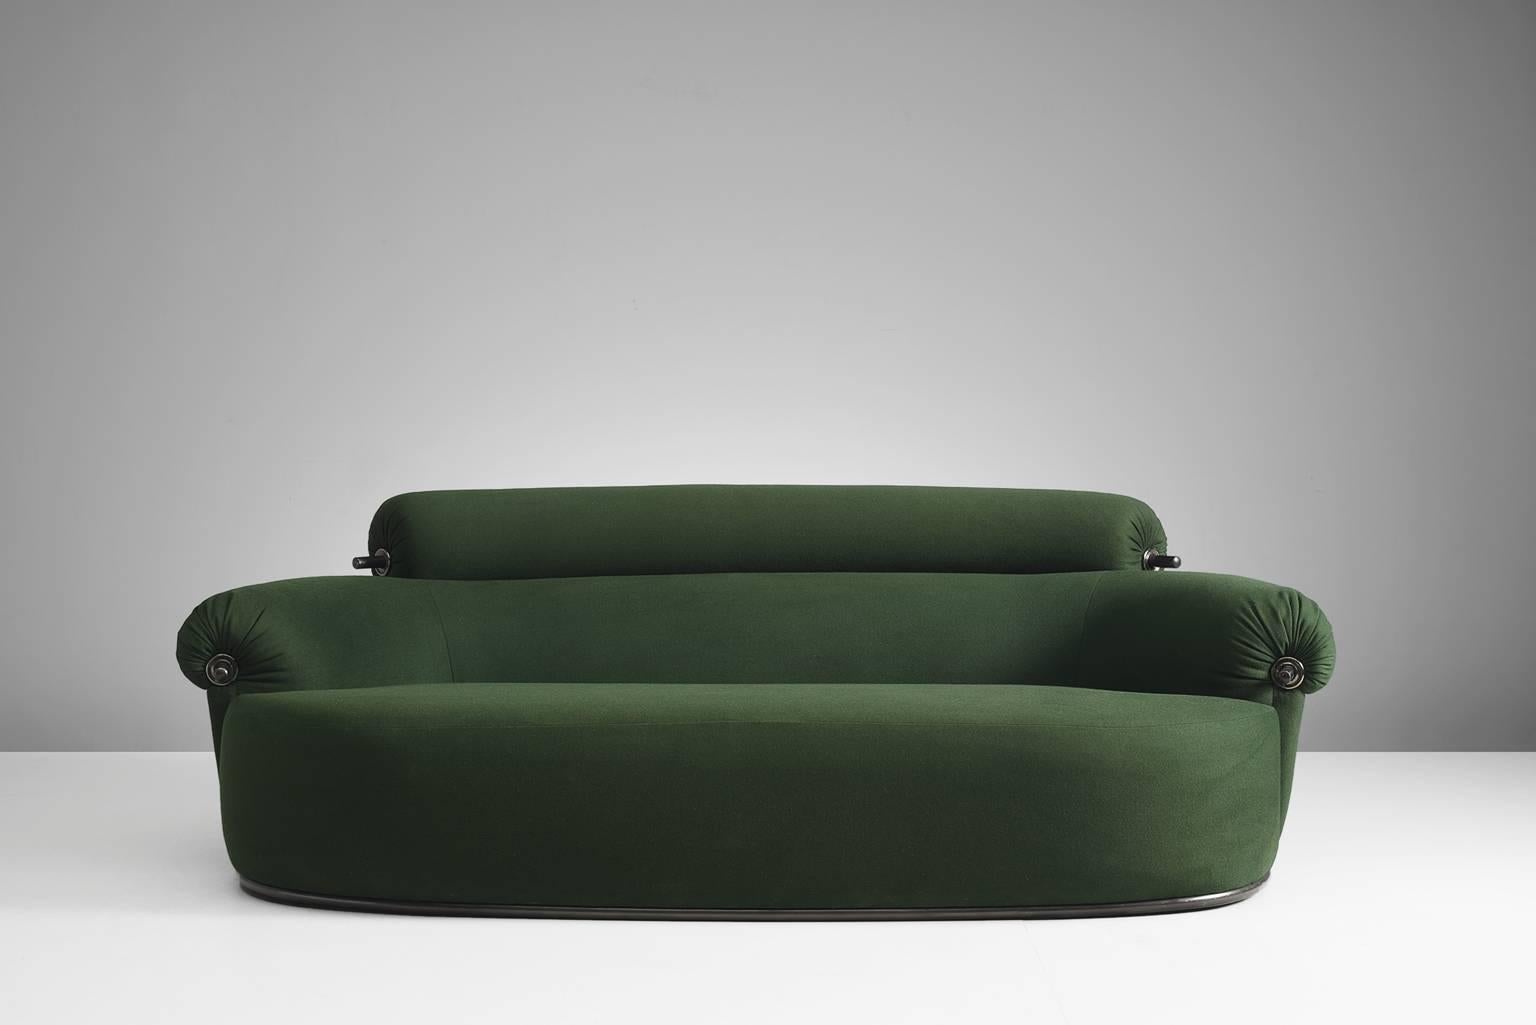 Luigi Caccia Dominioni for Azucena, Toro sofa, green fabric, Italy, 1979.

This sofa model 'P20B Toro' is produced by Azucena. The sofa is designed by Luigi Caccio Dominioni in Milan. The sofa is nicknamed Toro which is used because of several